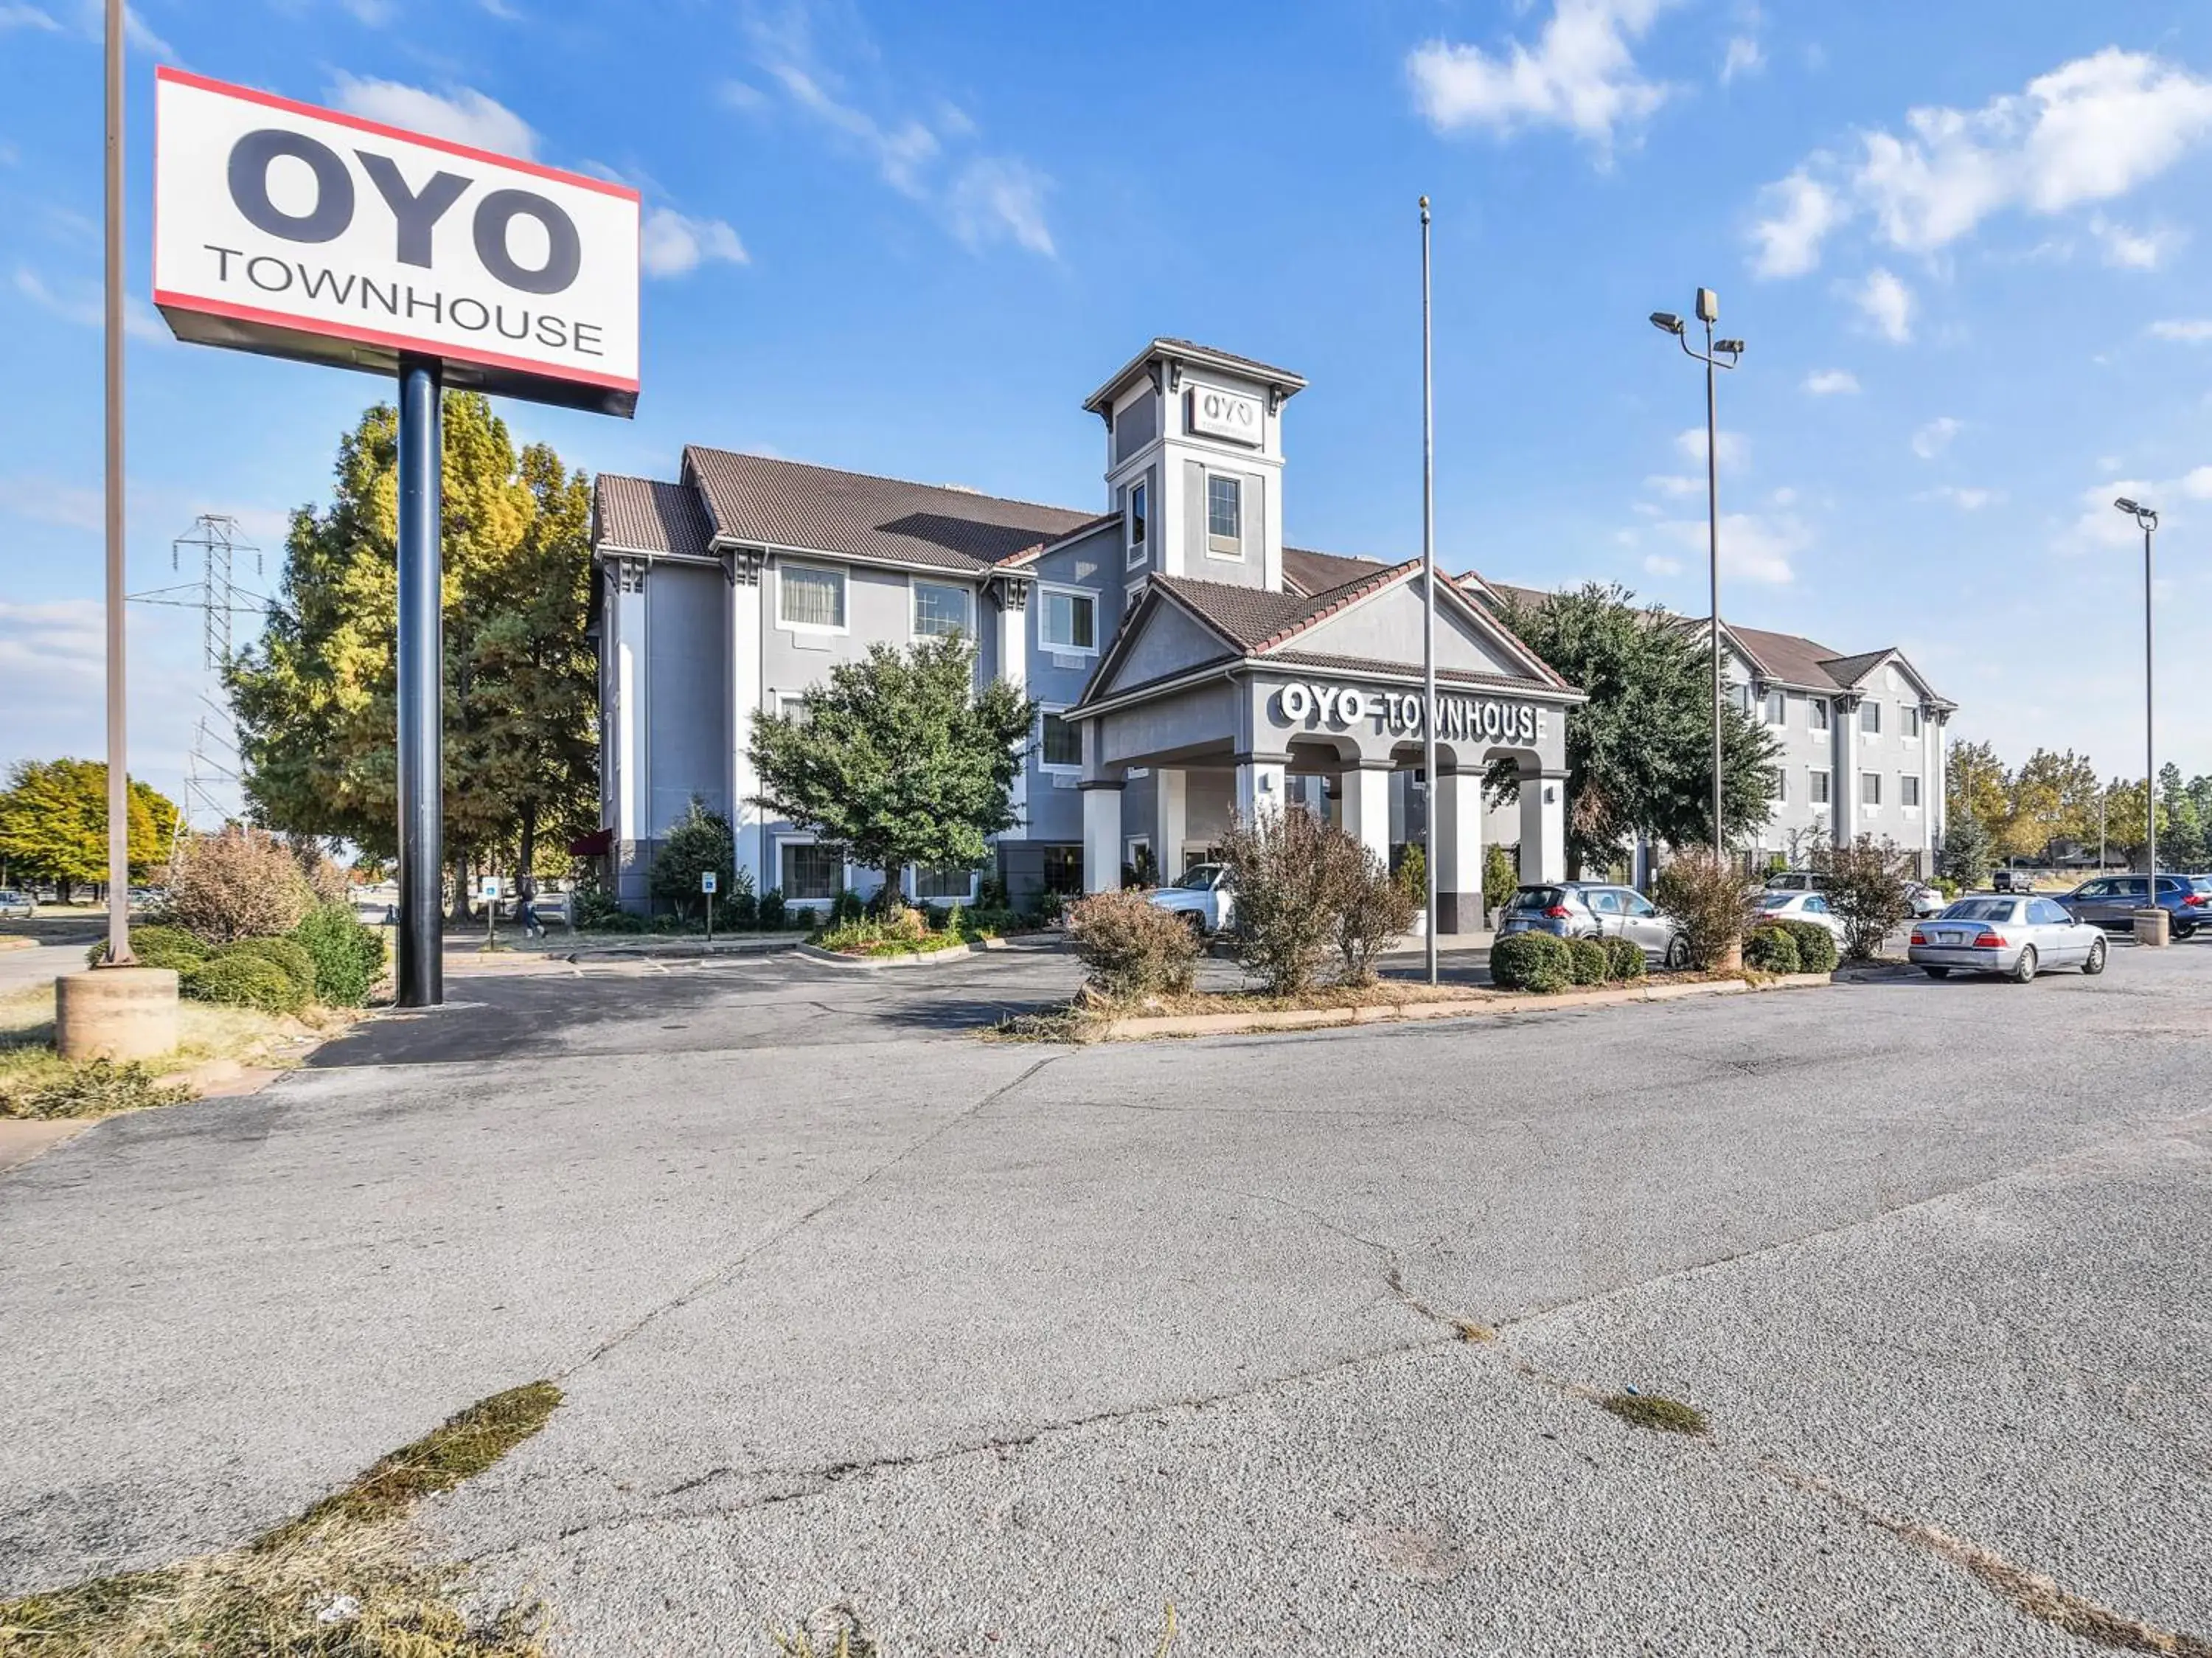 Property Building in OYO Townhouse Oklahoma City Airport